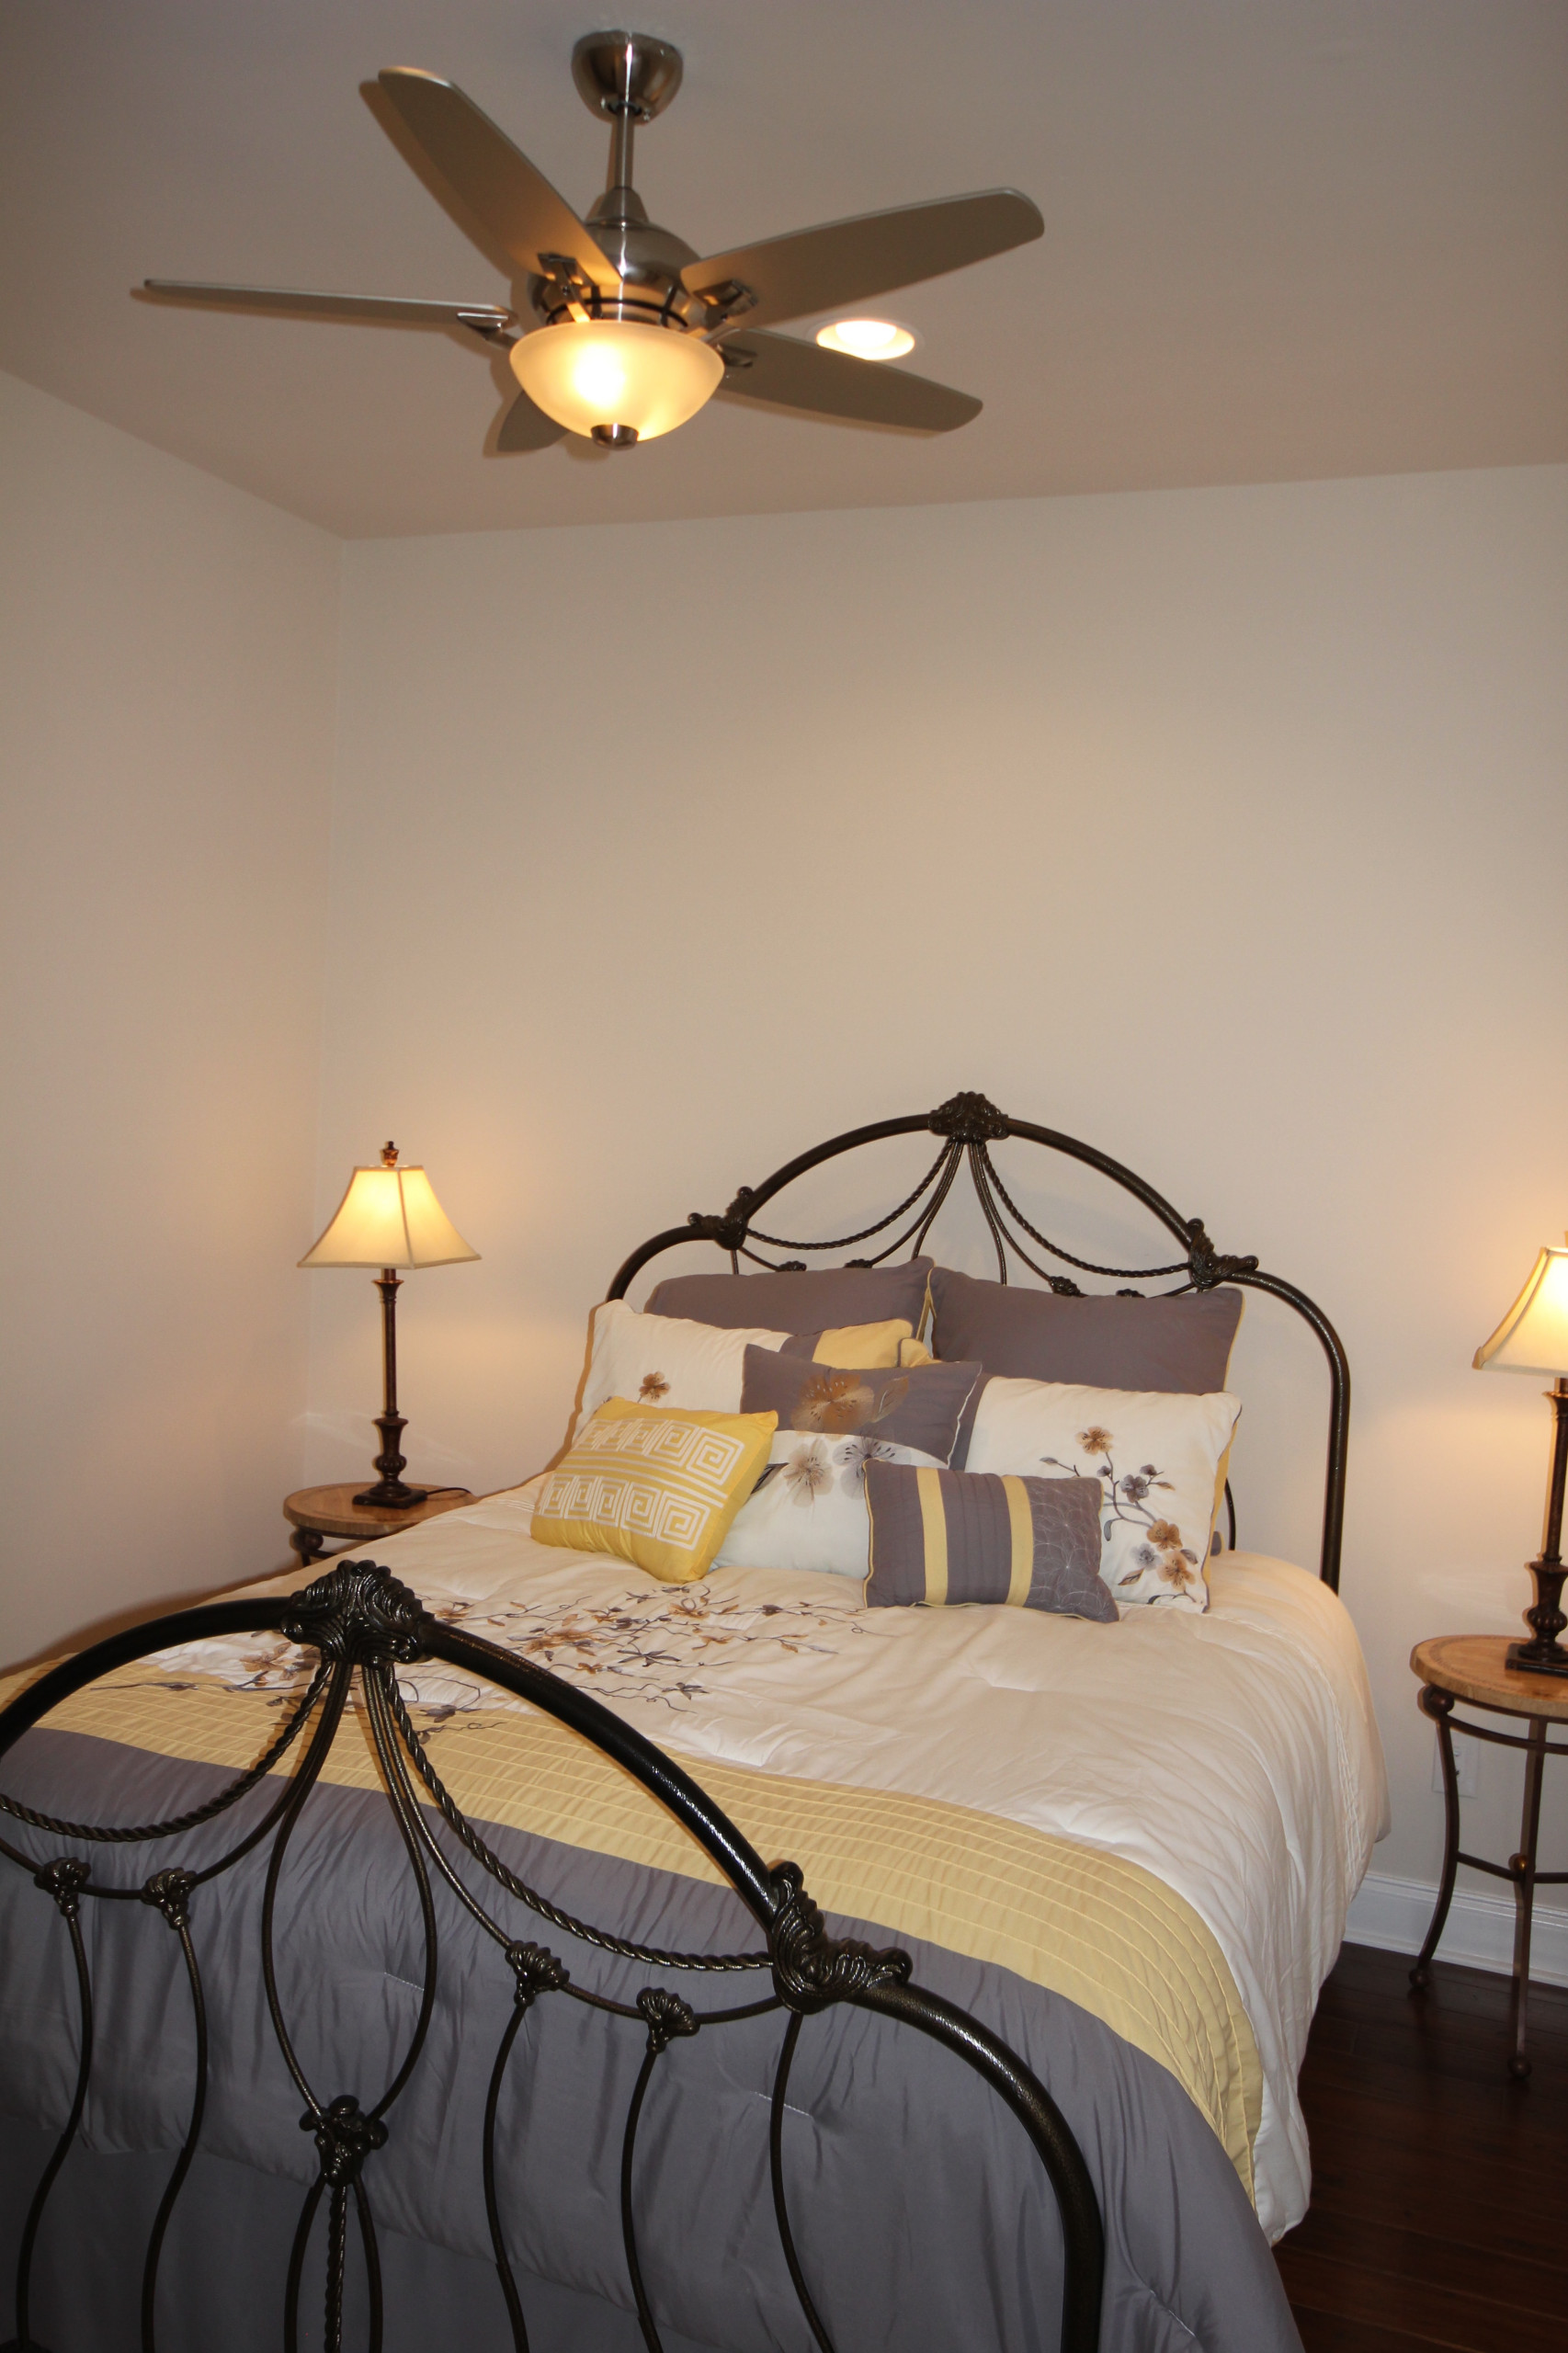 Guest Bedroom in Yellows and Grays